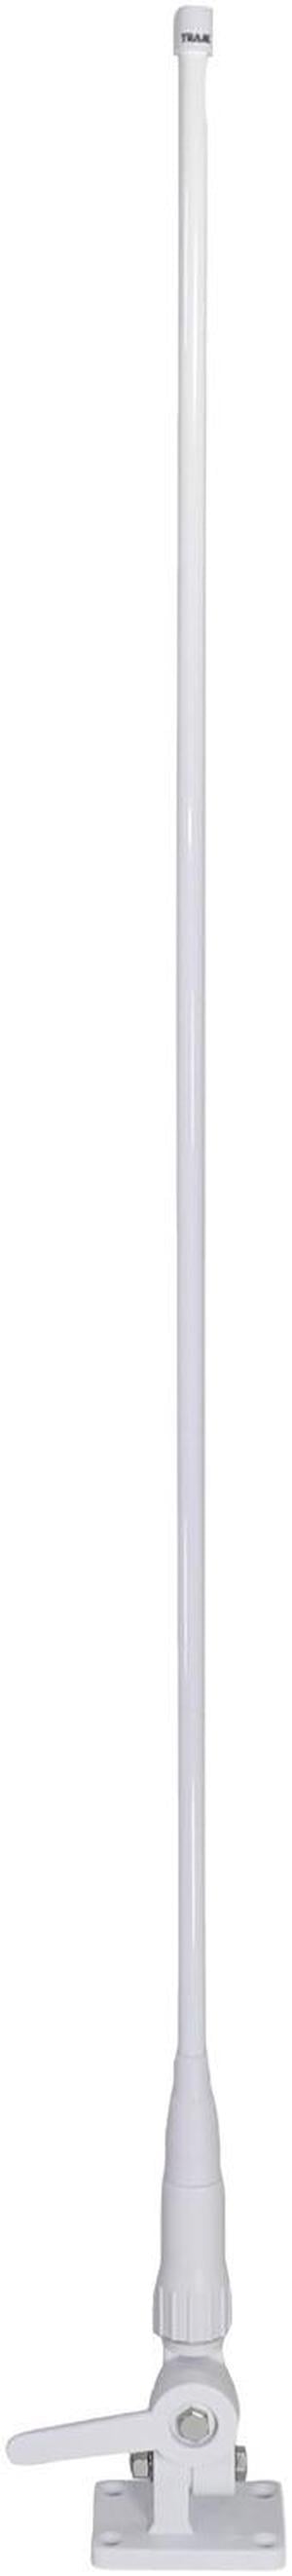 TRAM 1614 46" VHF 3 Dbd Gain Marine Antenna with Cable Built-in to Ratchet Mount Silver